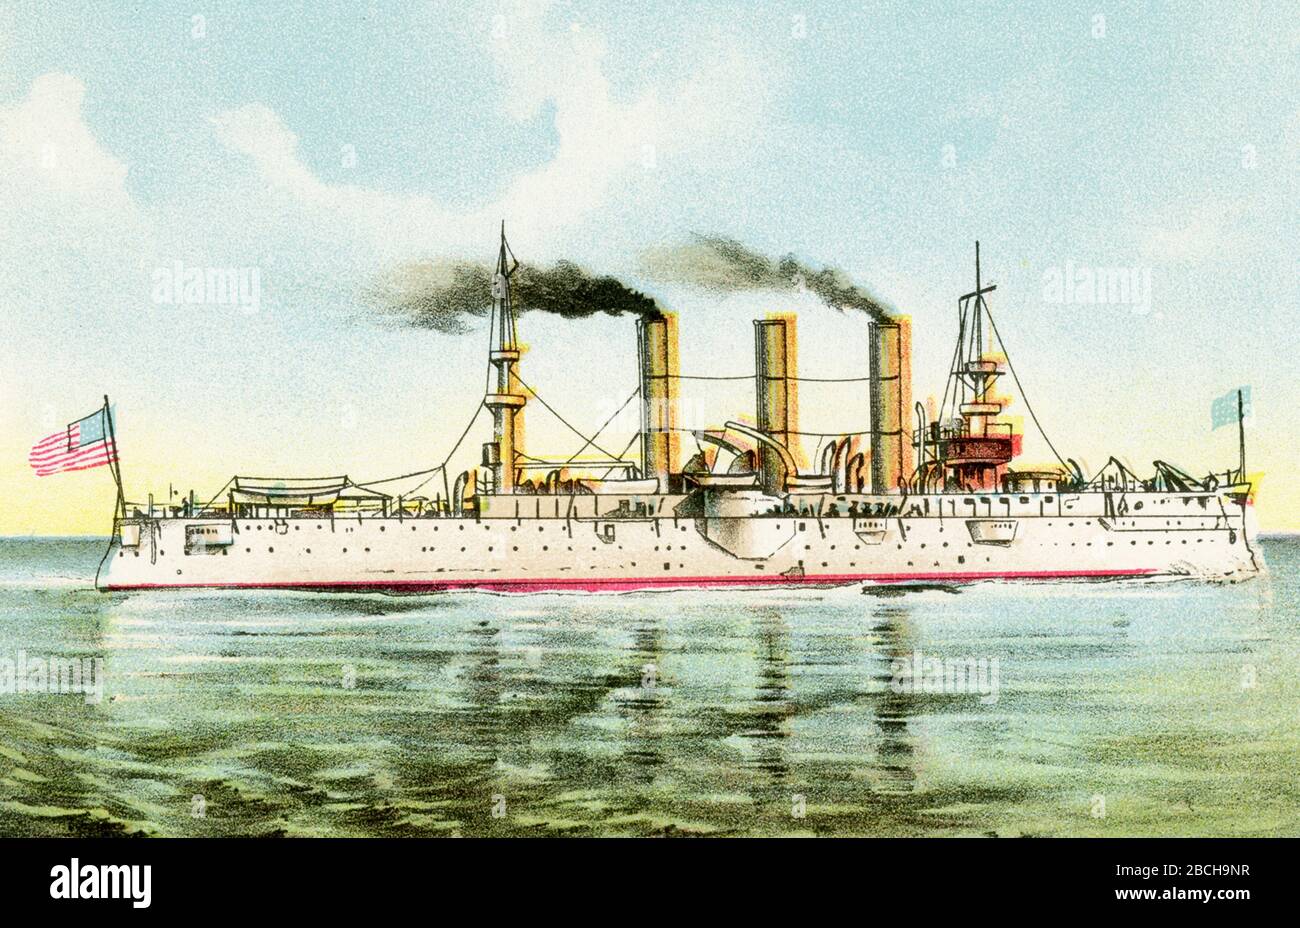 The United States Armored Cruiser Brooklyn was a key vessel in the Battle of Santiago de Cuba on 3 July, in which the Spanish Fleet was destroyed. It is referred to as the USS Brooklyn (ACR-3/CA-3). The  United States Armored Cruiser New York (also known as USS New York [ACR-2/CA-2]) was the second United States Navy armored cruiser so designated; the first was the ill-fated Maine, which was soon redesignated a second-class battleship. Due to the unusually protracted construction of Maine, New York was actually the first armored cruiser to enter U.S. Navy service. Stock Photo